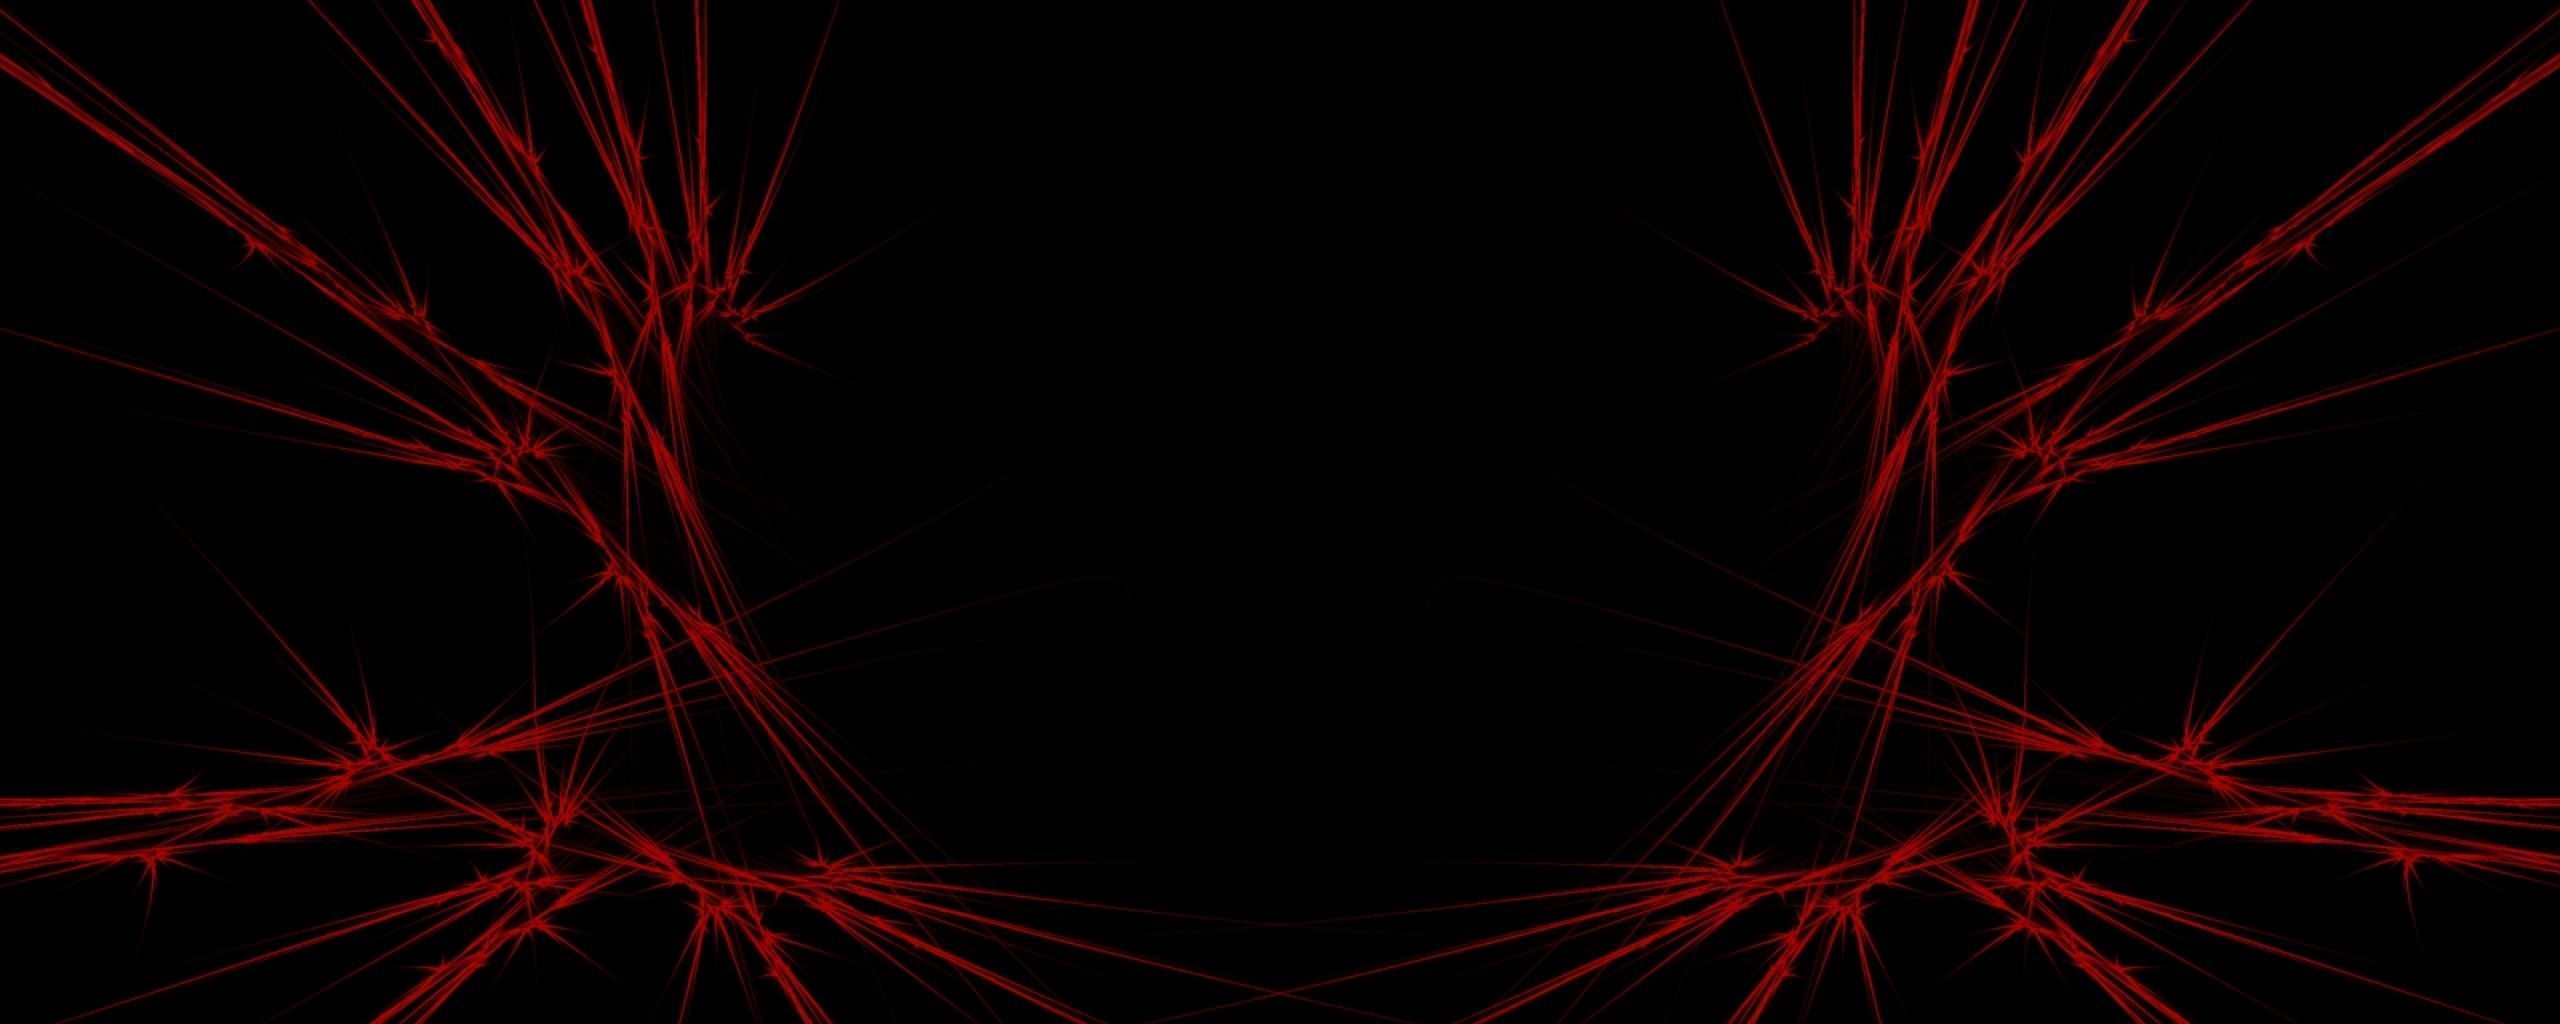 Download Wallpaper 2560x1024 Red, Black, Abstract Dual Monitor ...